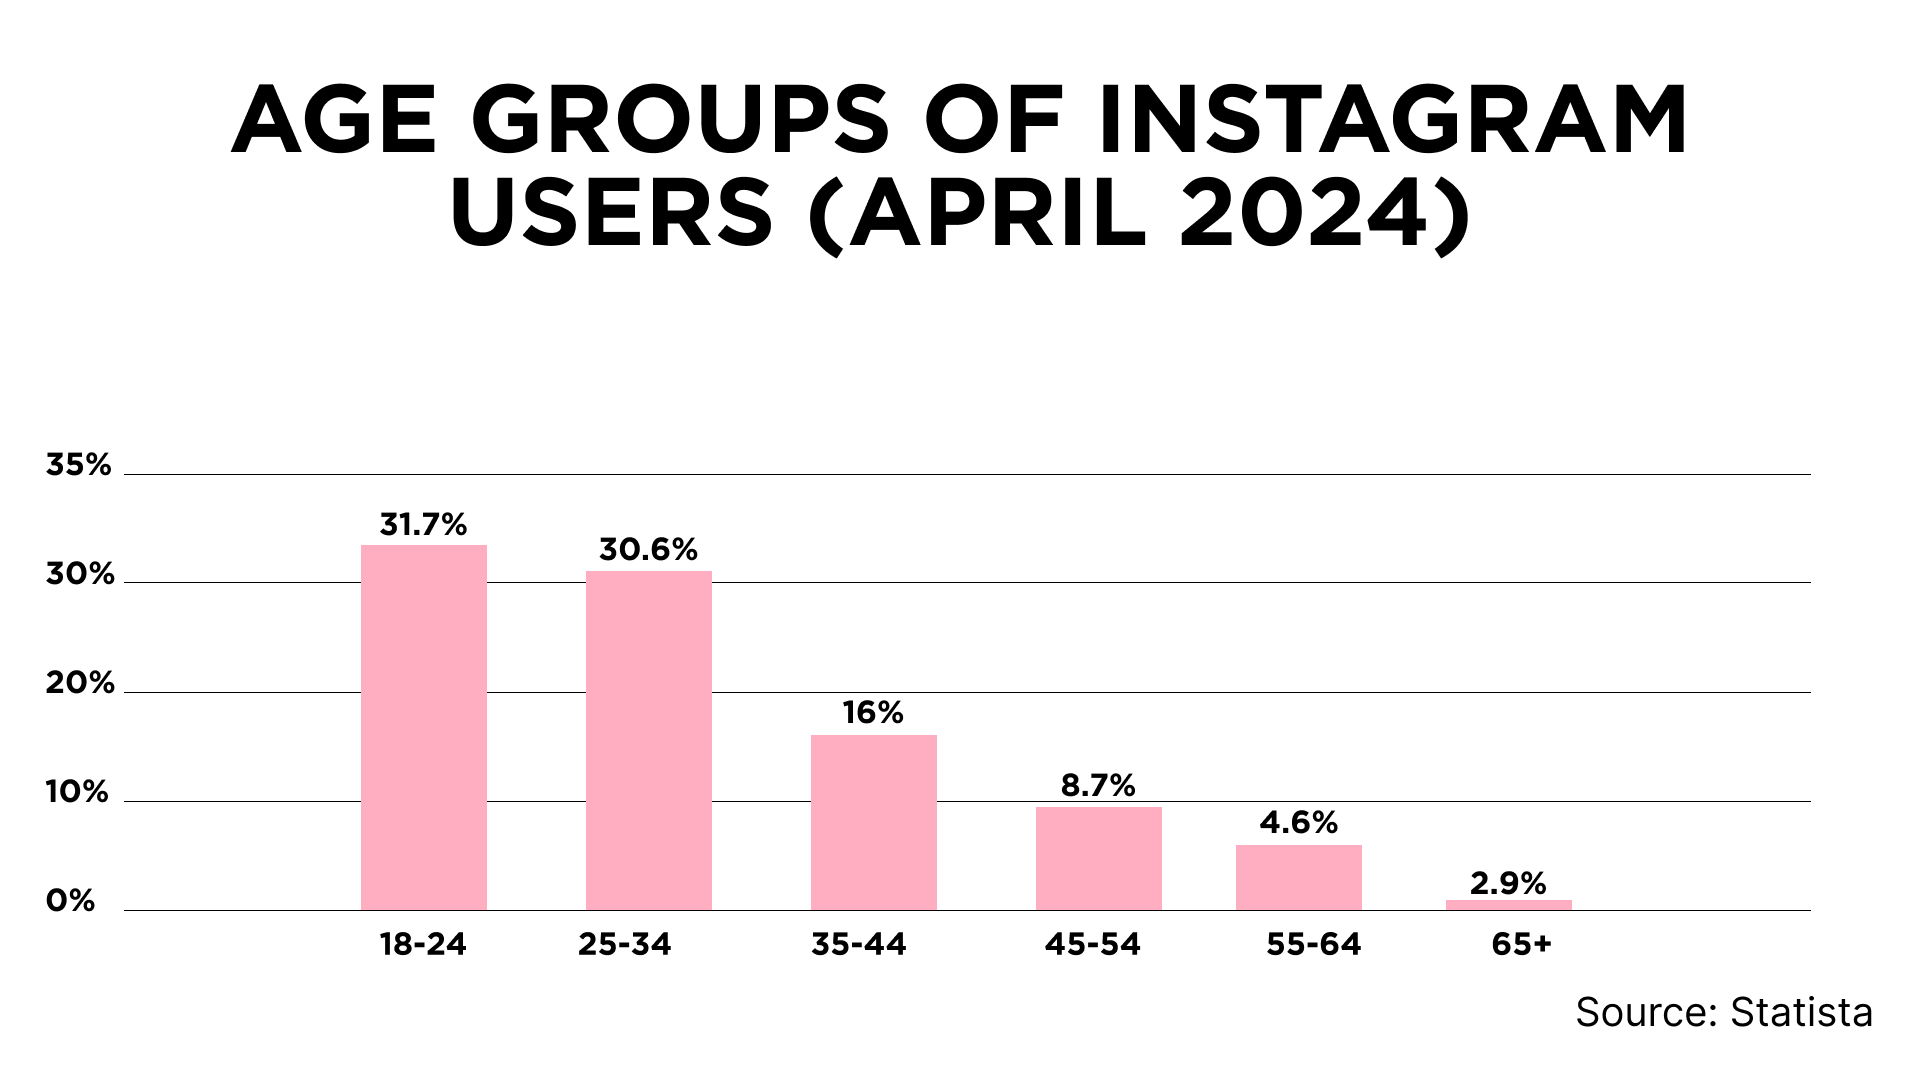 Age groups of Instagram users (April 2024)